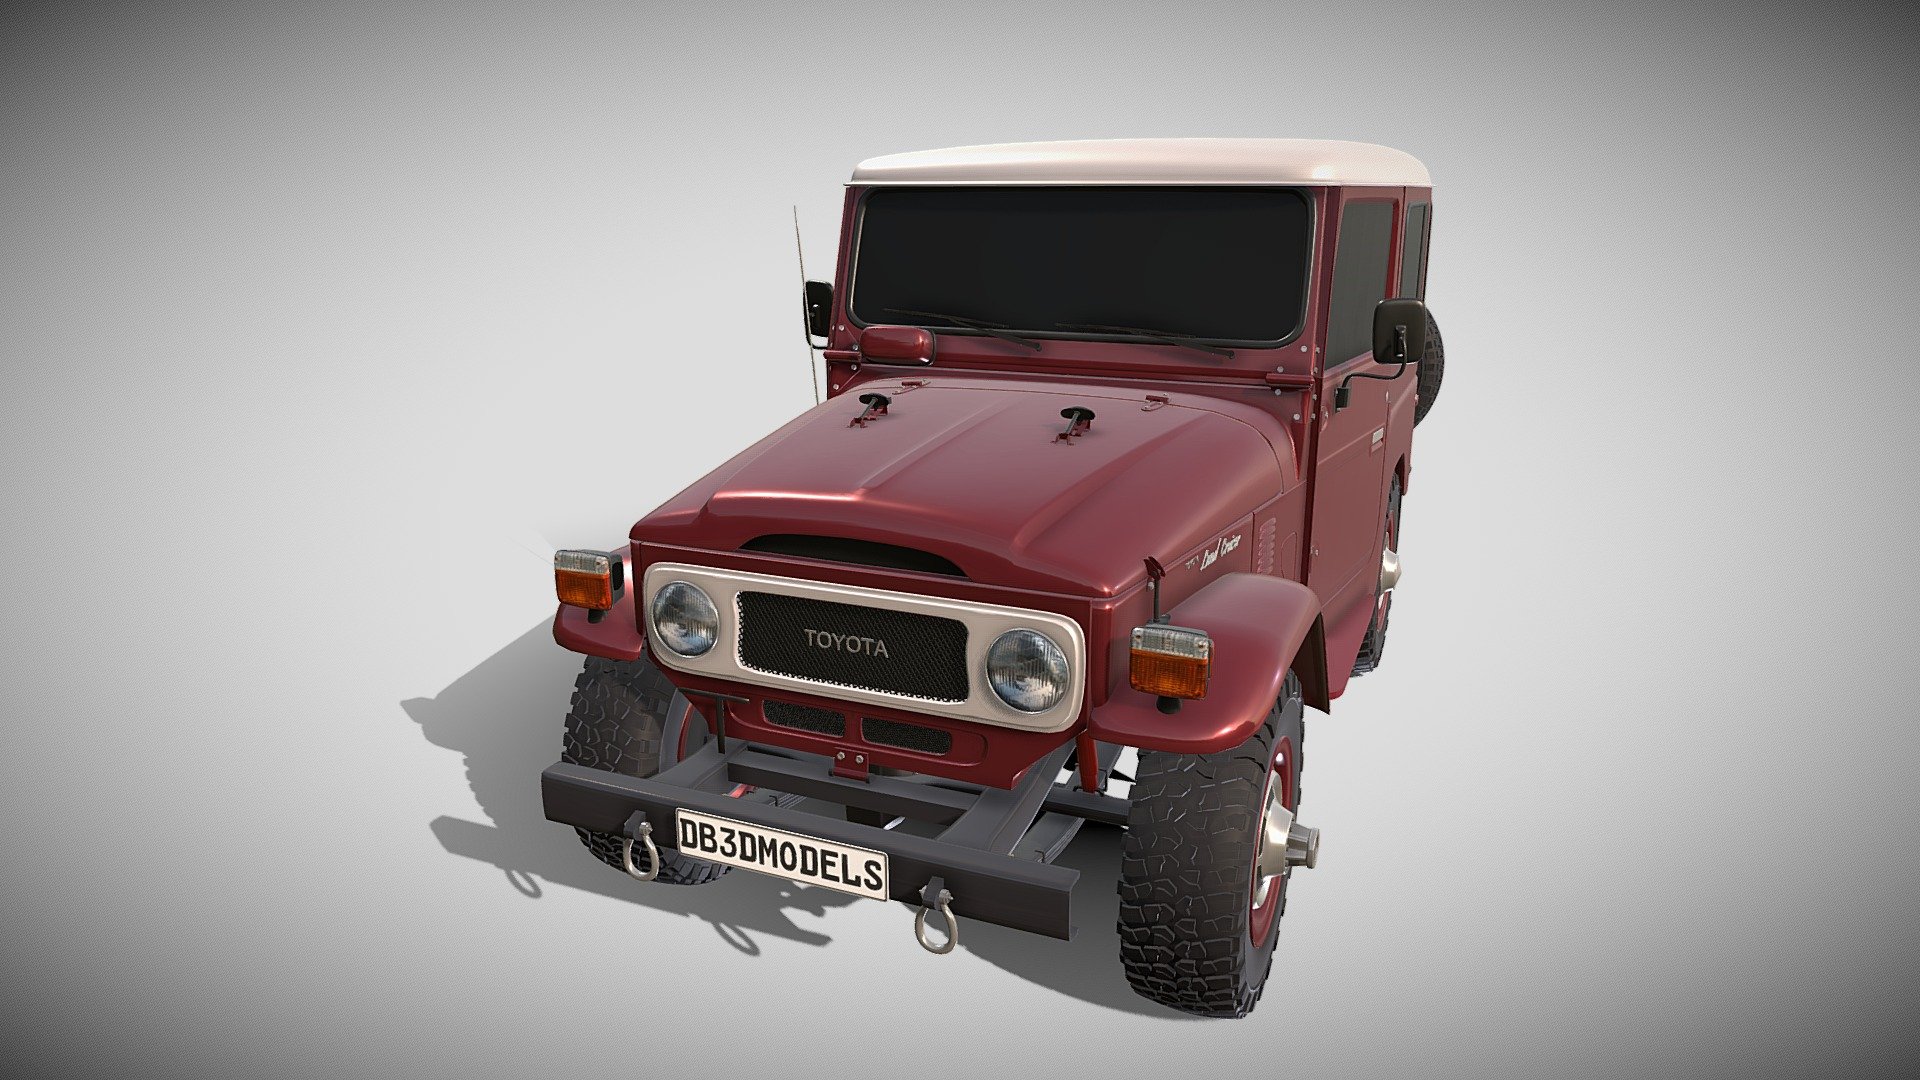 A very accurate model of the Toyota Land Cruiser FJ-40.

File formats:
-.blend, rendered with cycles, as seen in the images;
-.obj, with materials applied and textures;
-.dae, with materials applied and textures;
-.fbx, with material slots applied;
-.stl;

3D Software:
This 3d model was originally created in Blender 2.79 and rendered with Cycles.

Materials and textures:
The model has materials applied in all formats, and is ready to import and render.
The model comes with multiple png image textures.

Preview scenes:
The preview images are rendered in Blender using its built-in render engine &lsquo;Cycles'.
Note that the blend files come directly with the rendering scene included and the render command will generate the exact result as seen in previews.
Scene elements are on a different layer from the actual model for easier manipulation of objects 3d model